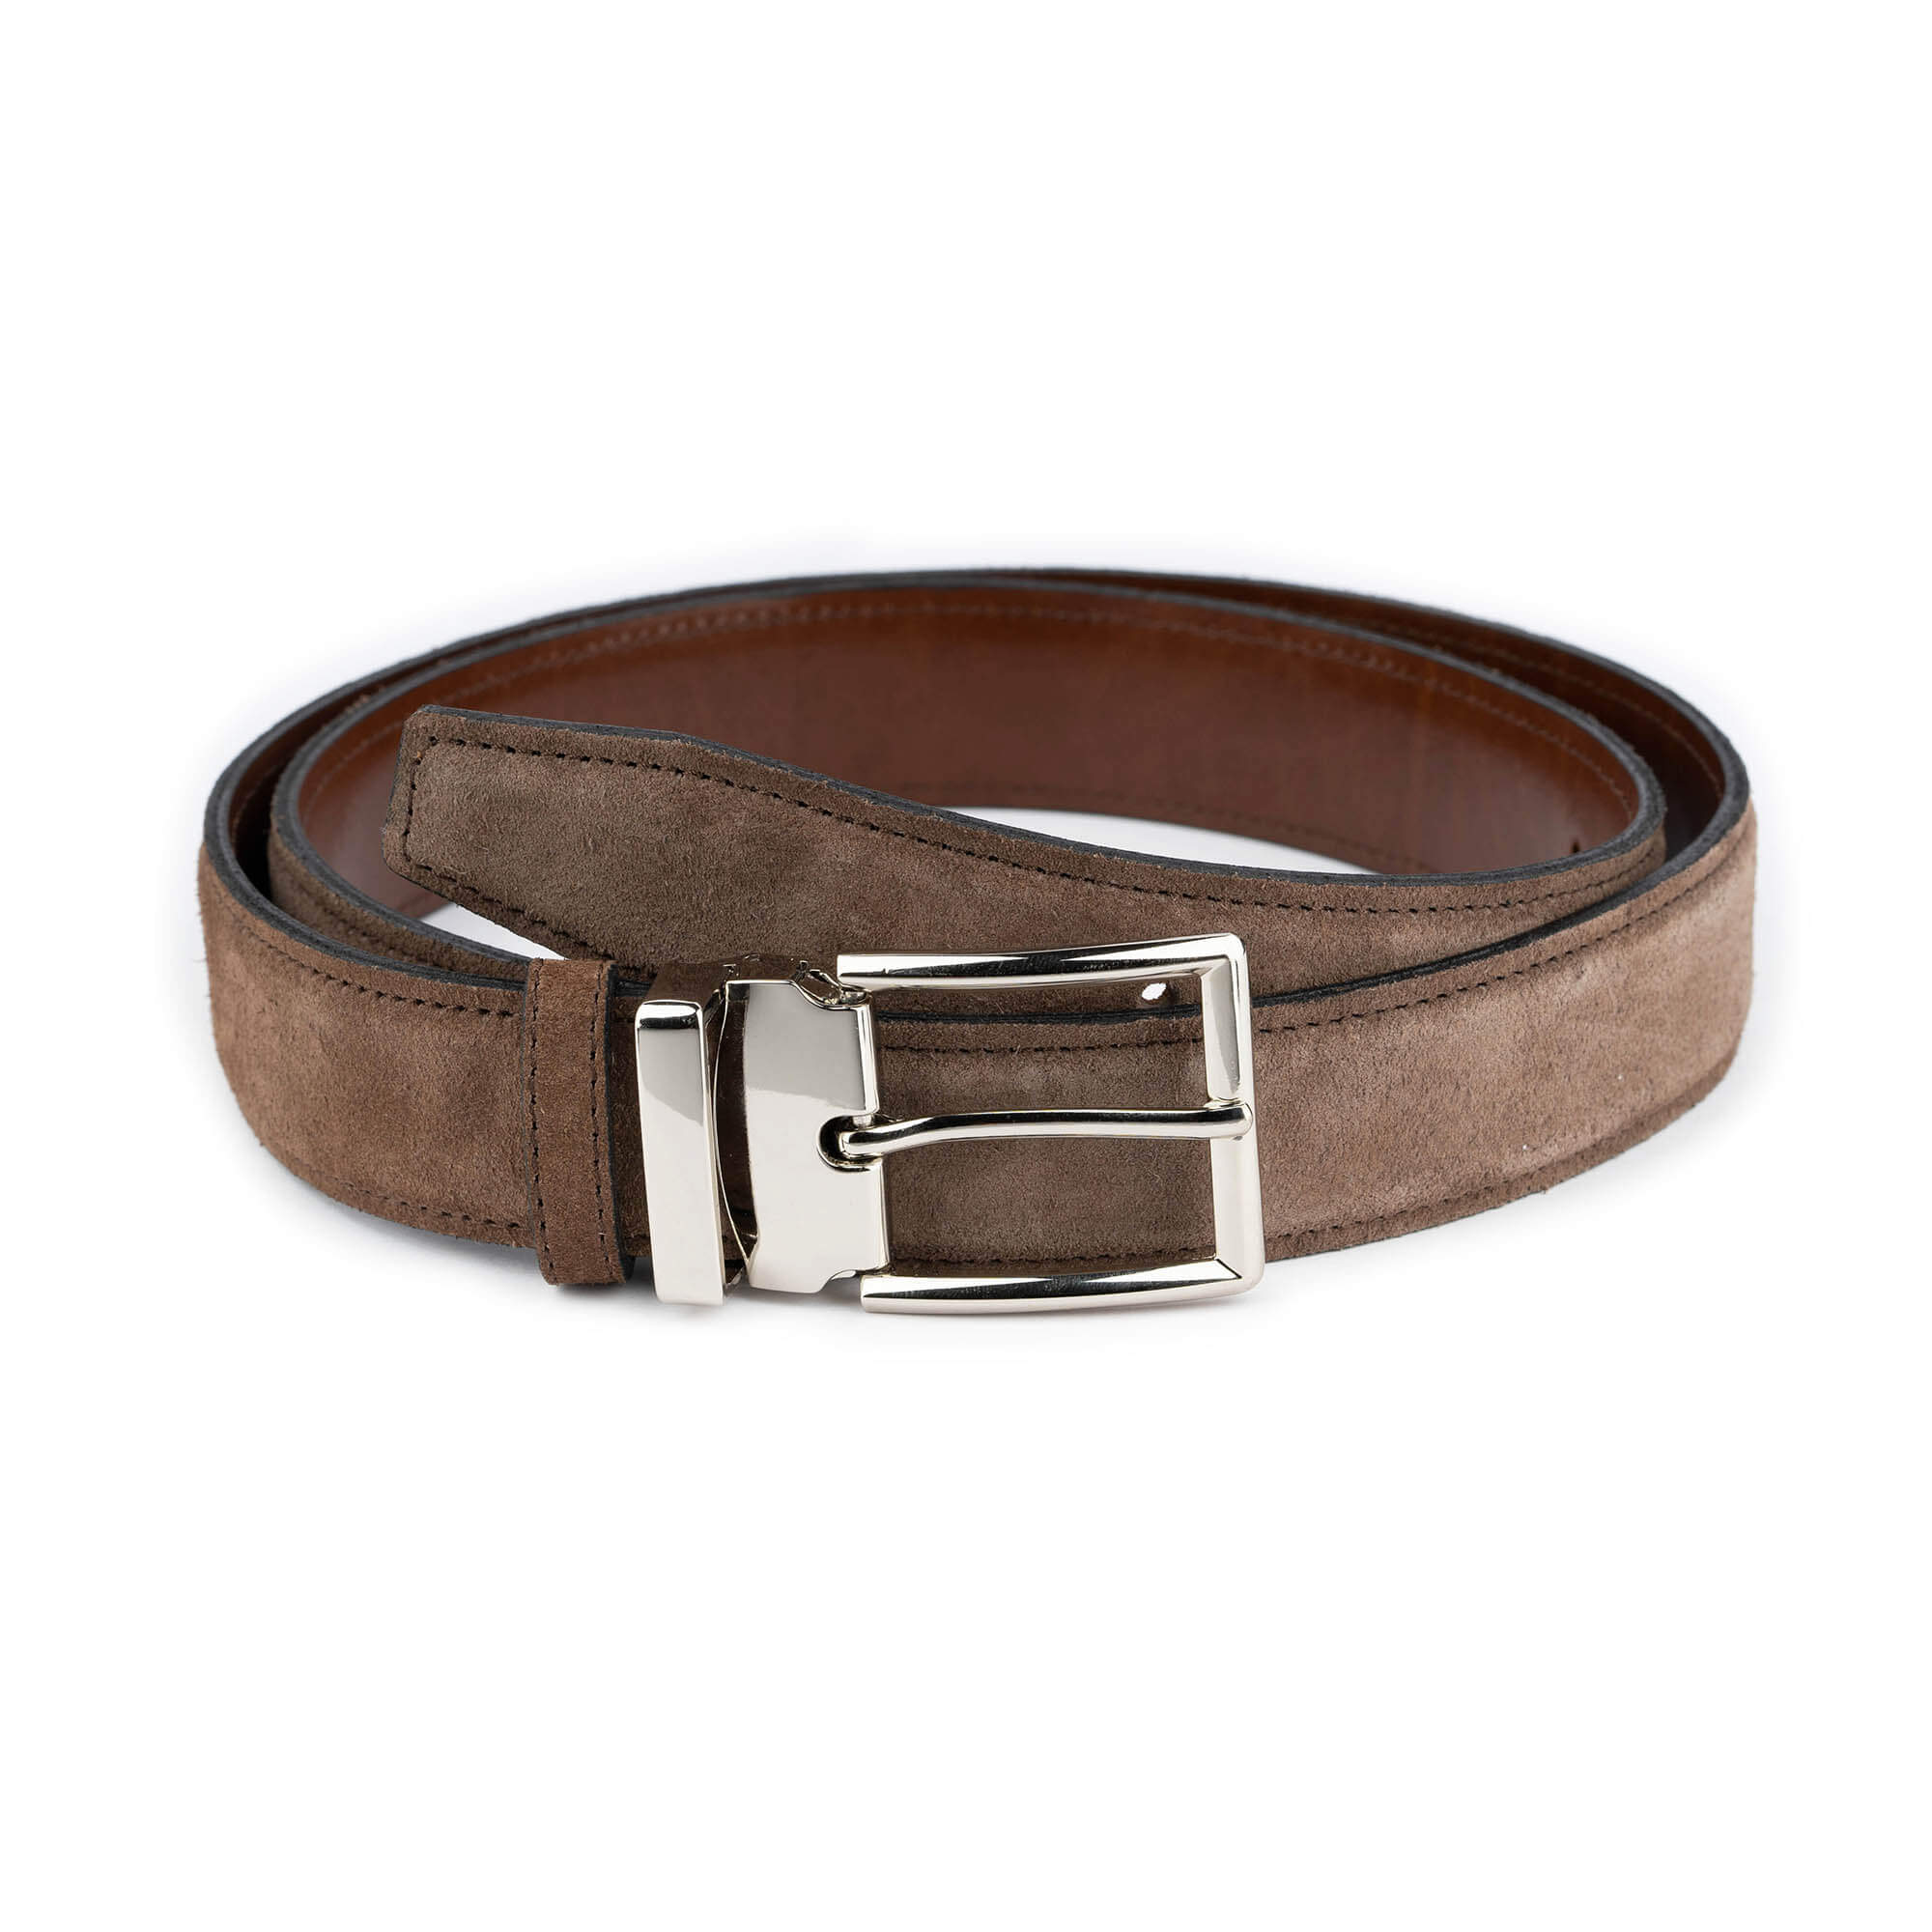 Leather Belt 100% Mens Real Brown XL-XXL 1" Polished Buckle Forest Belts Thick 